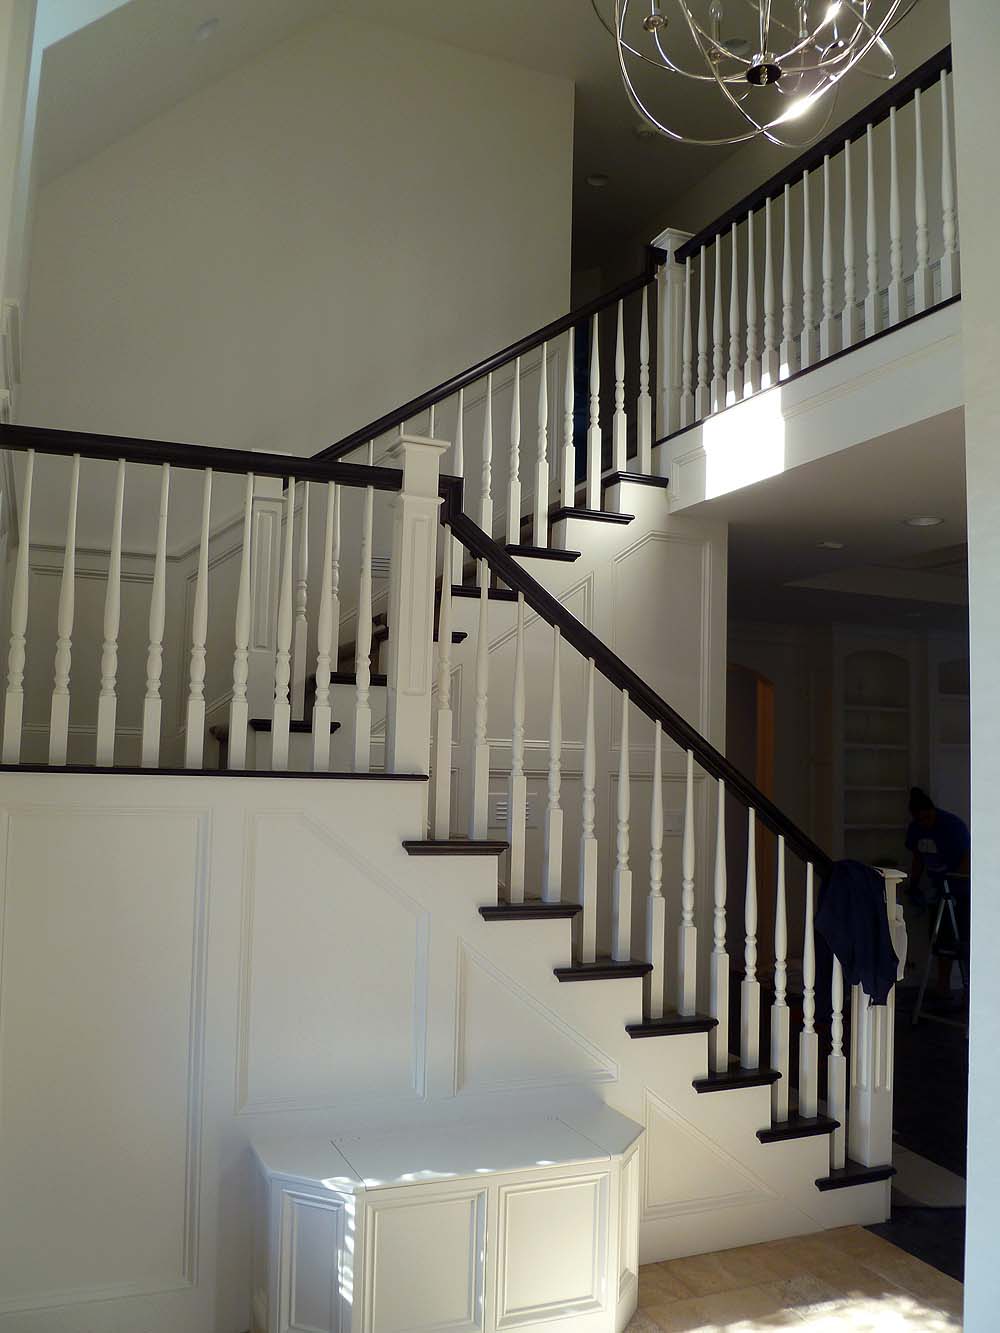 Open staircase with wood balusters and boxed newell posts